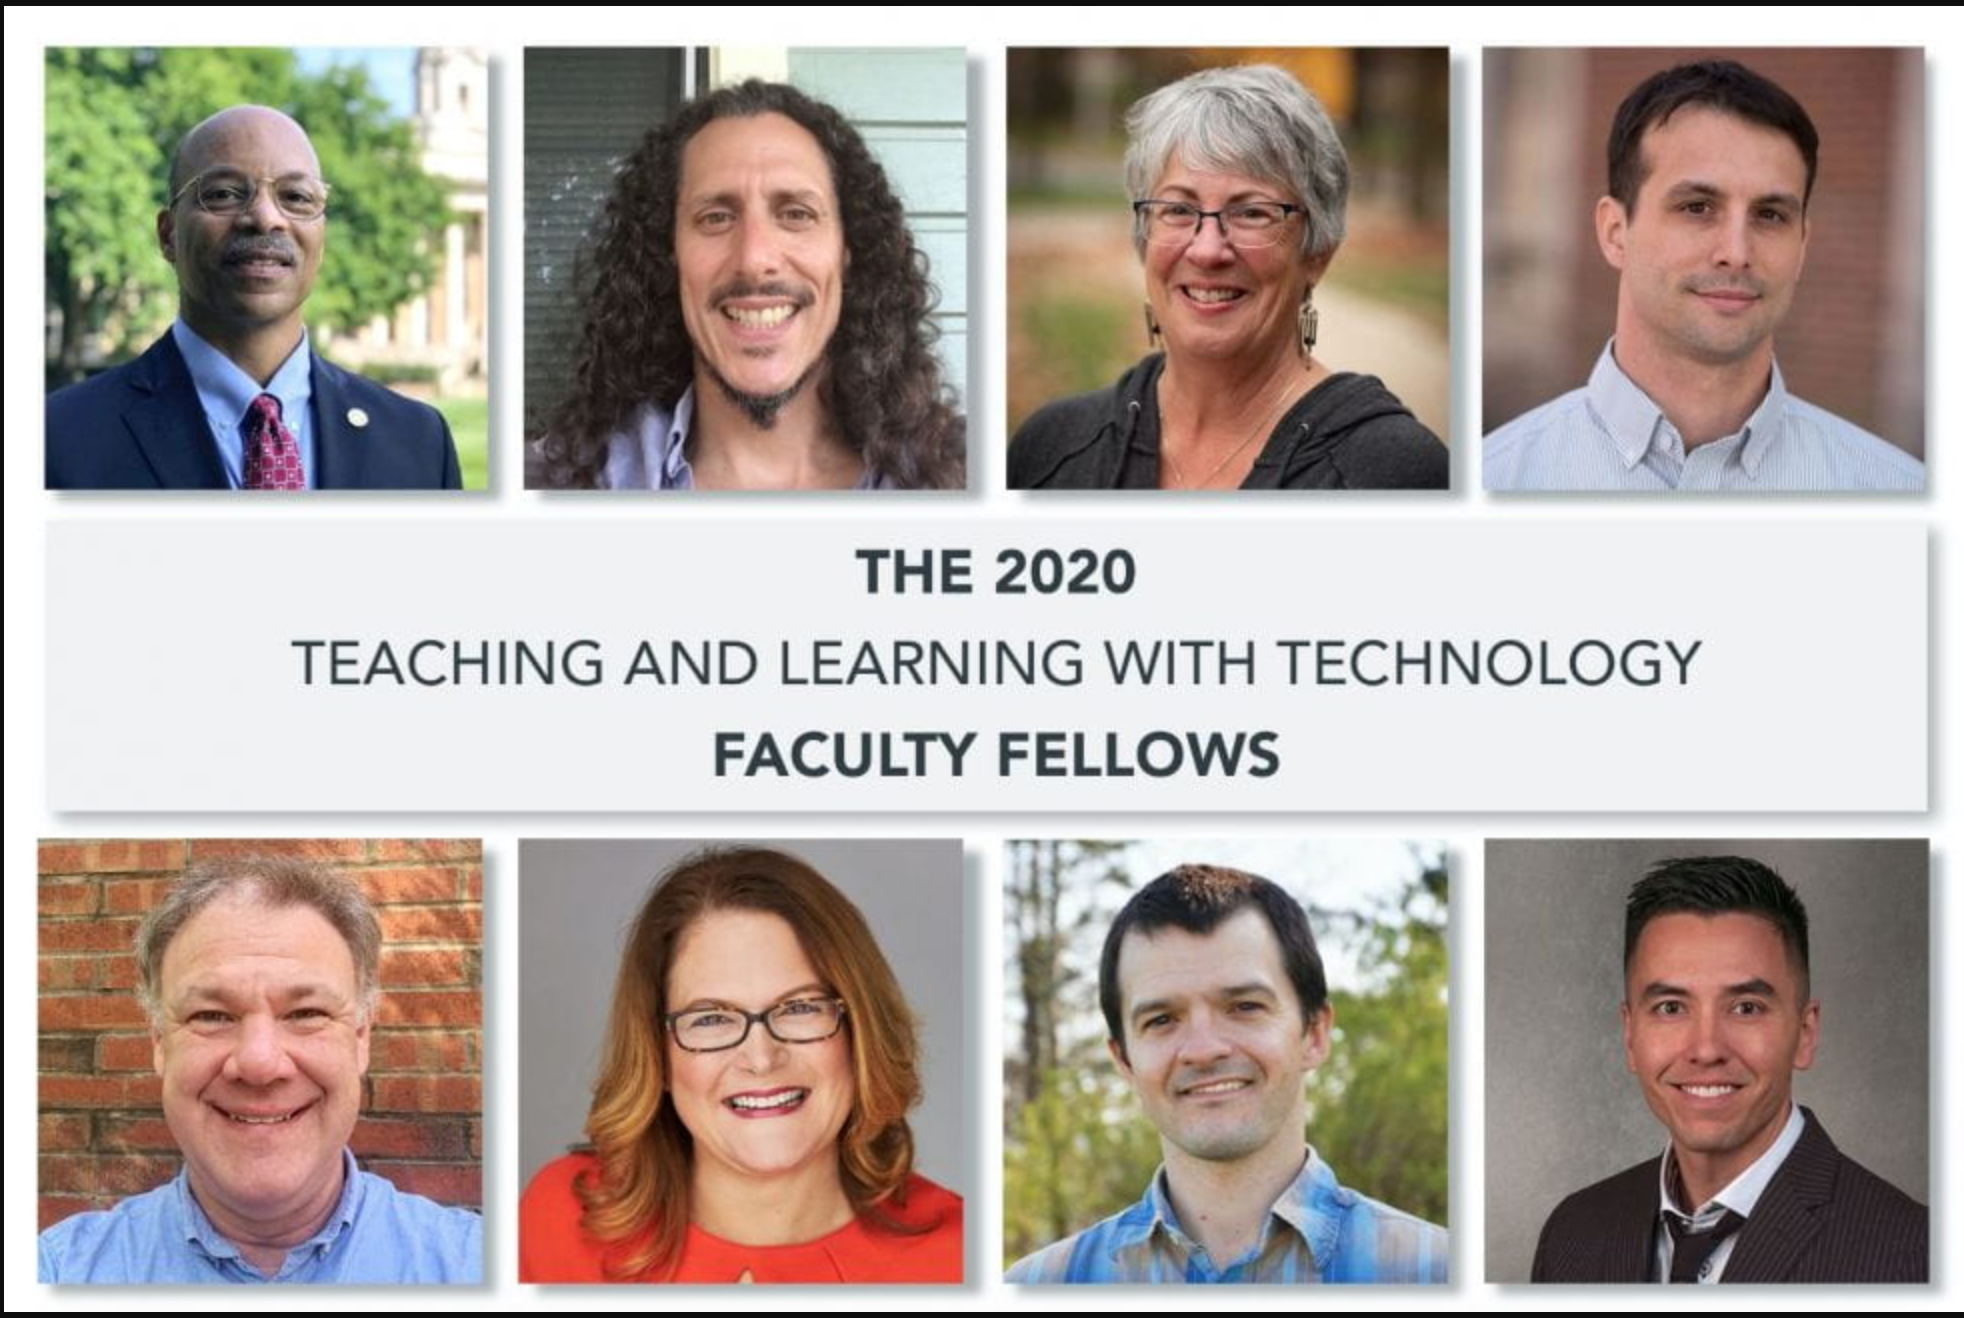 Teaching and Learning with Technology welcomes newest faculty fellows cohort